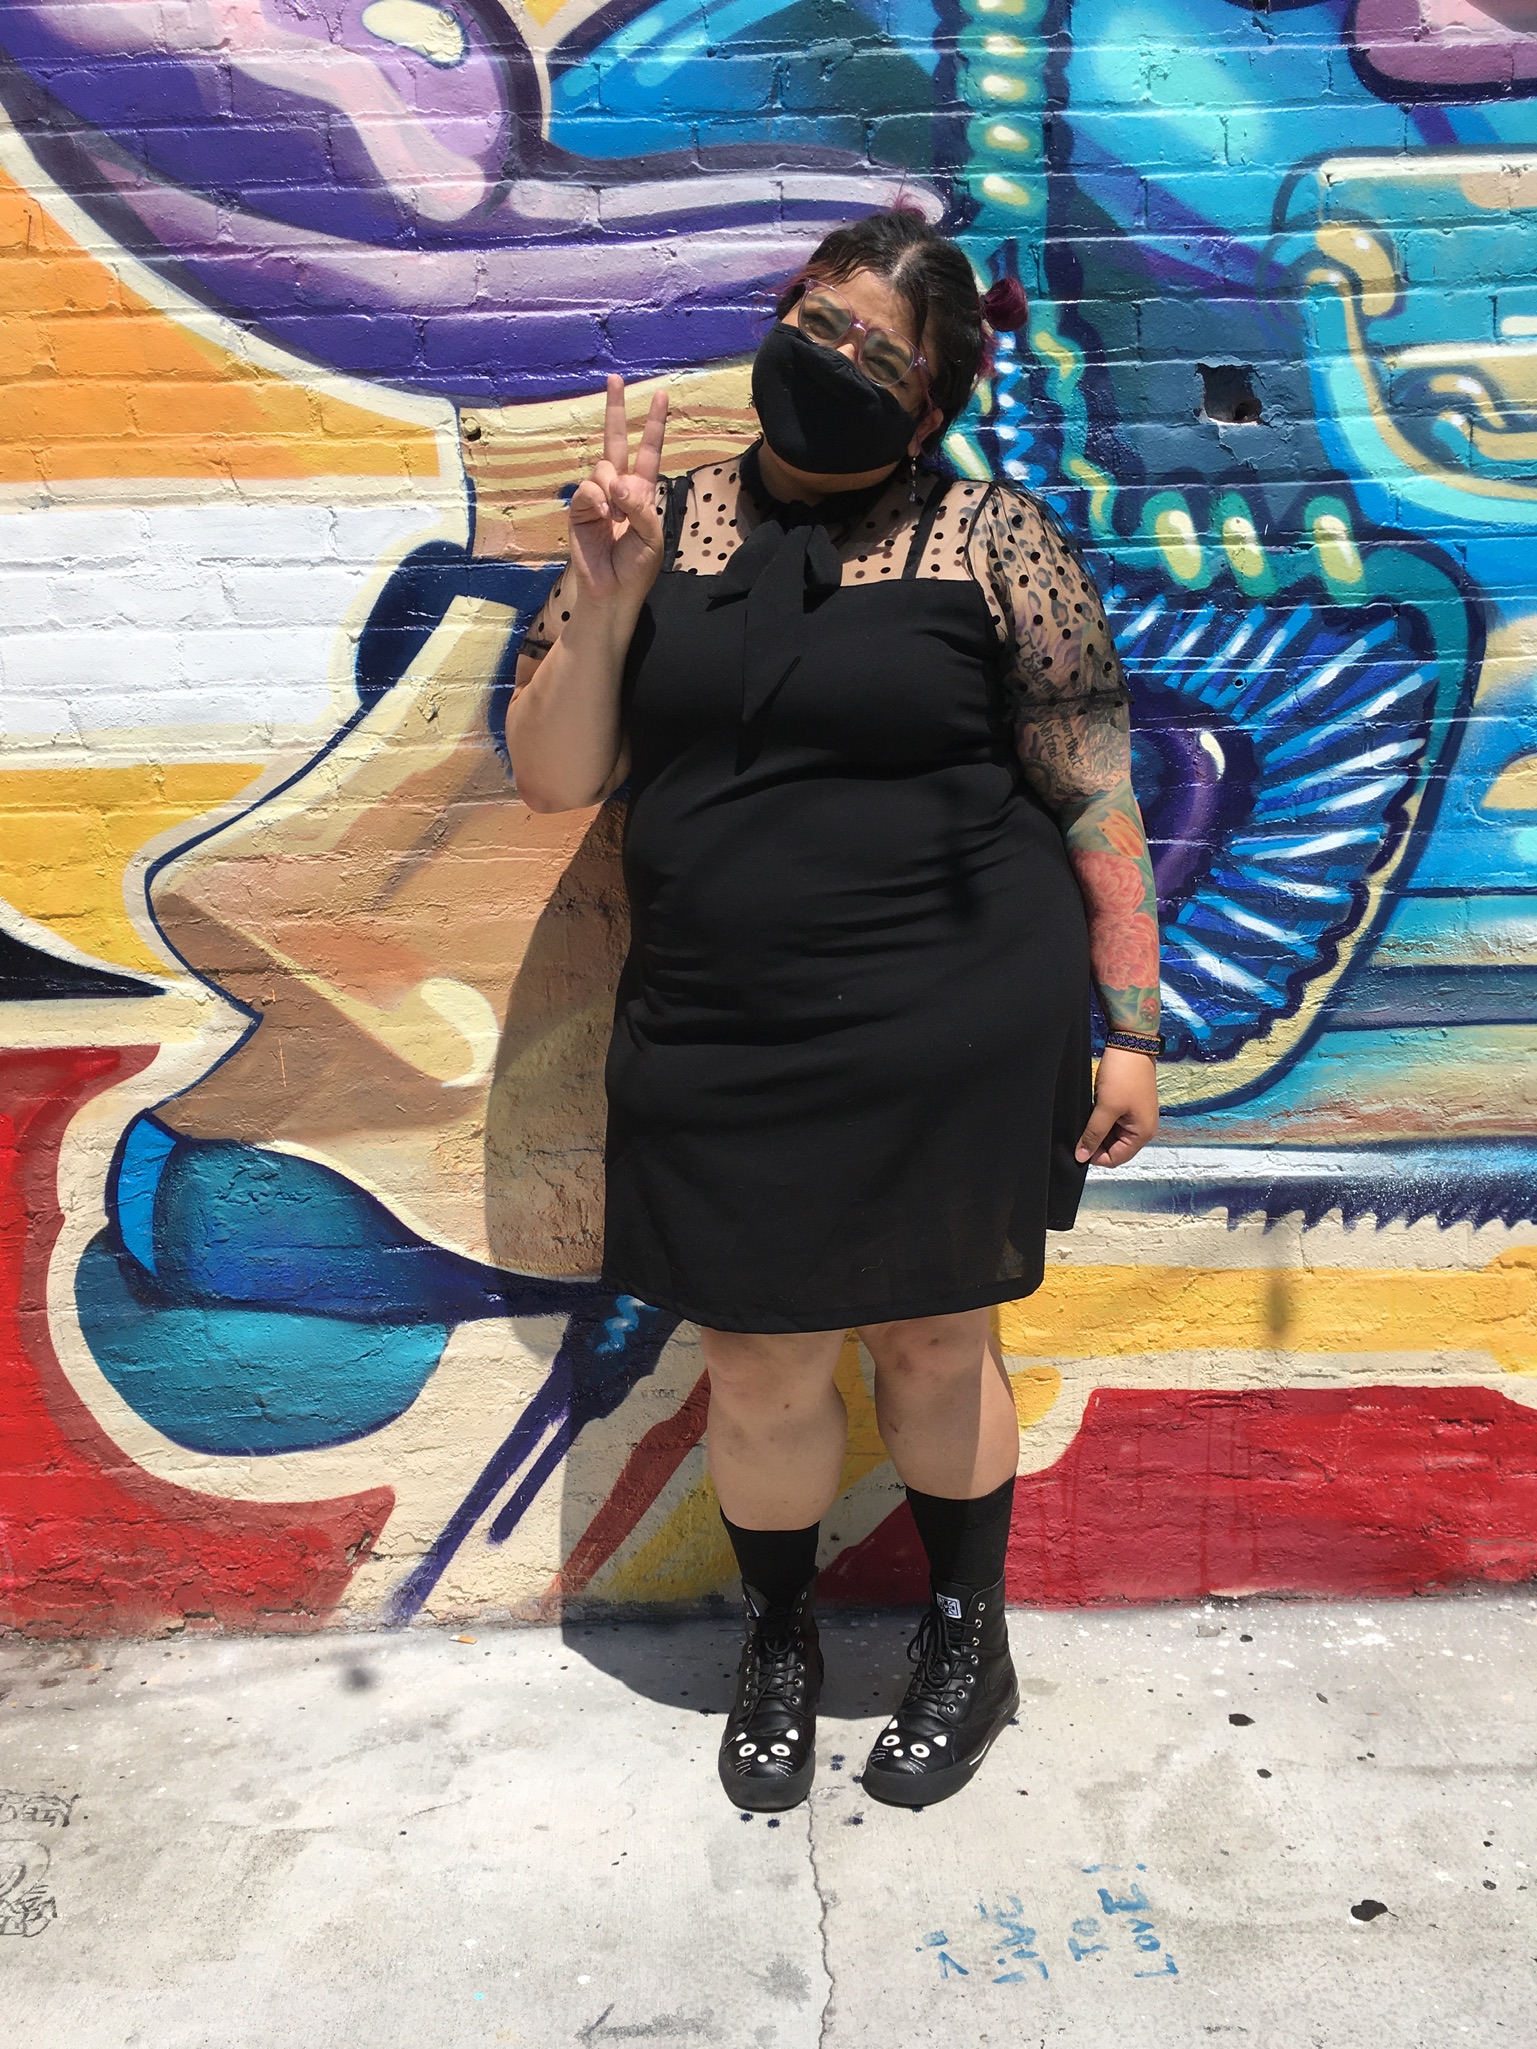 person standing in front of colorful mural wearing all black outfit and giving the peace sign